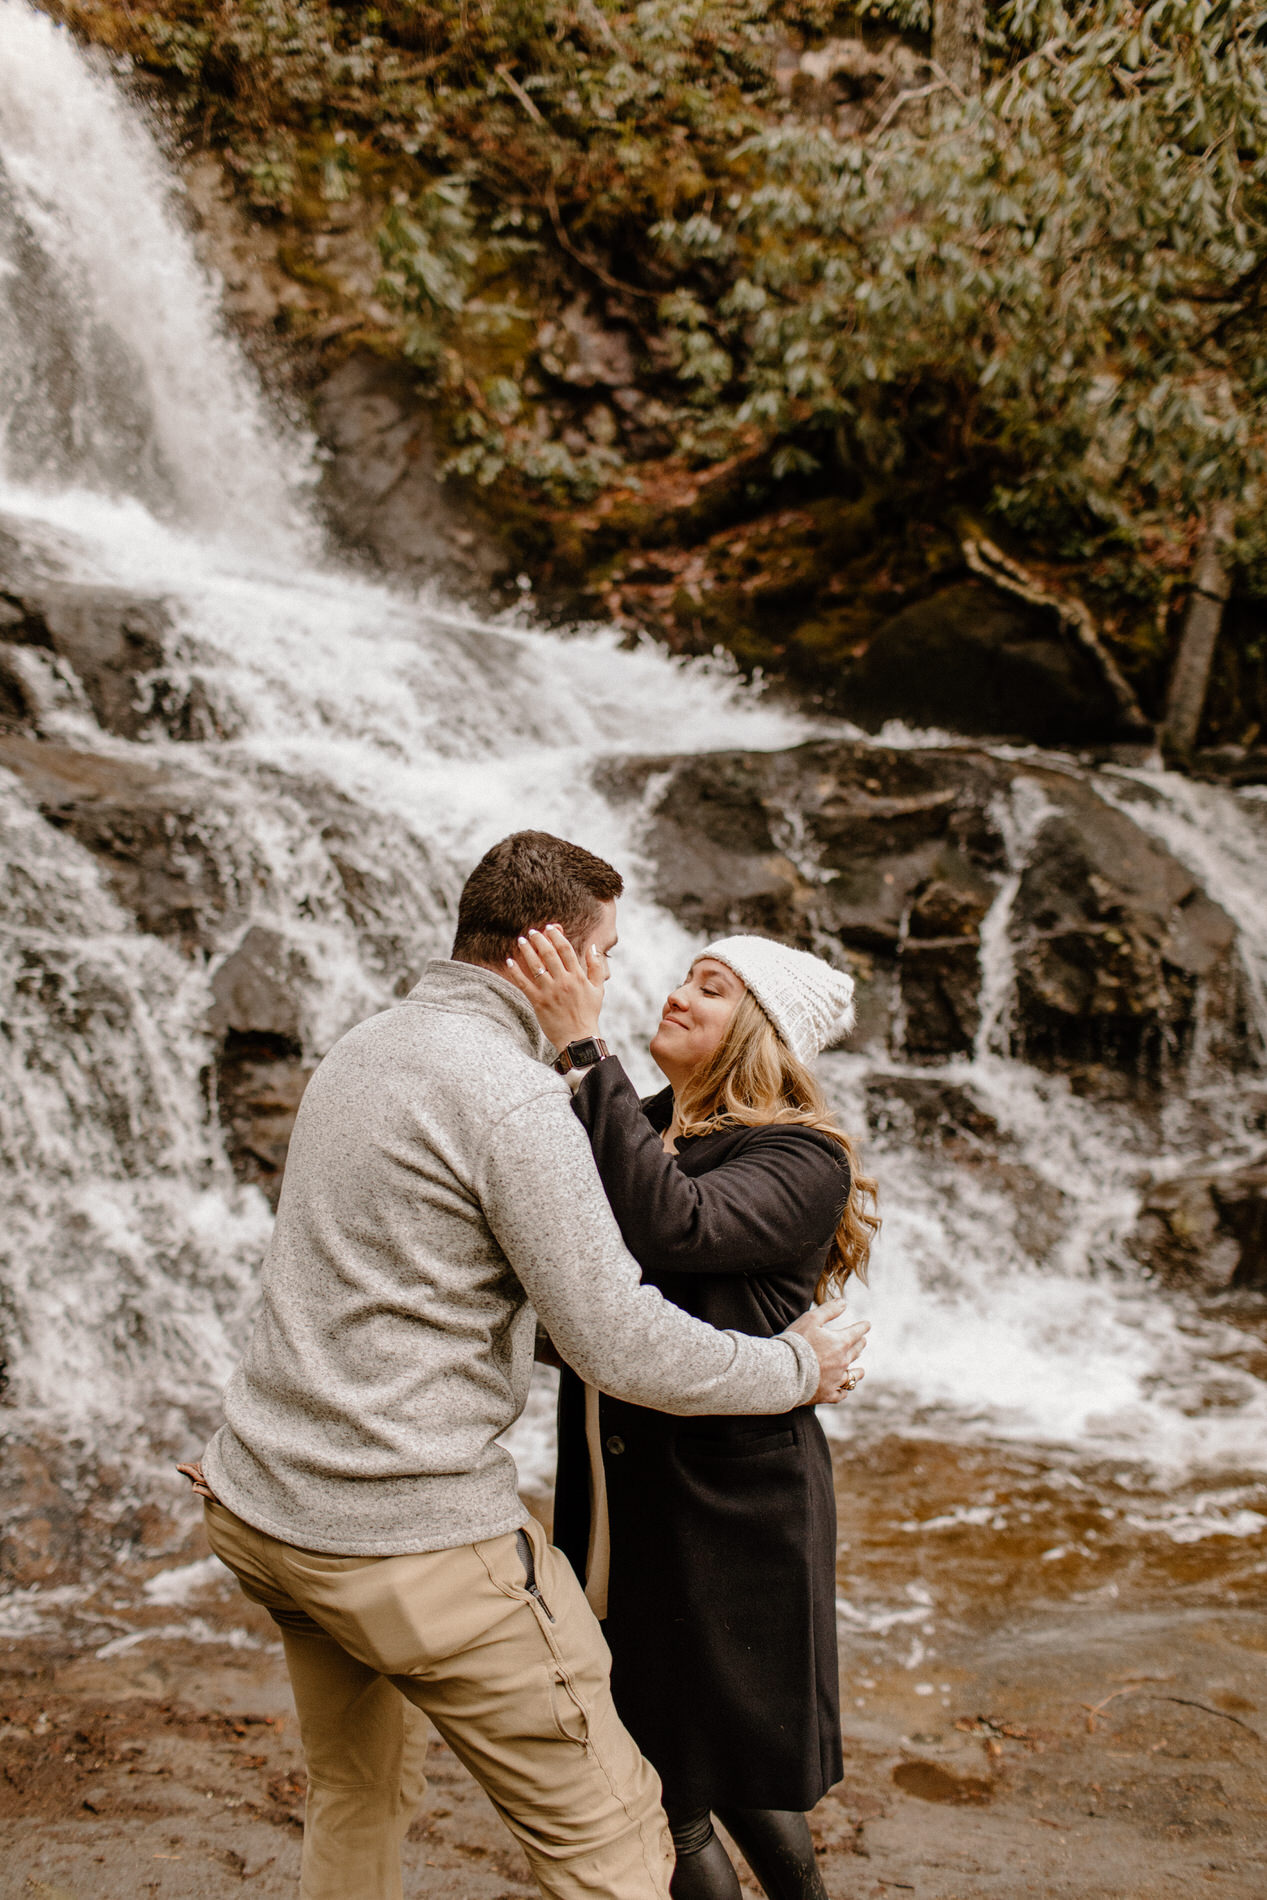 A proposal in front of the waterfall at Laurel Falls in the Smoky Mountains.